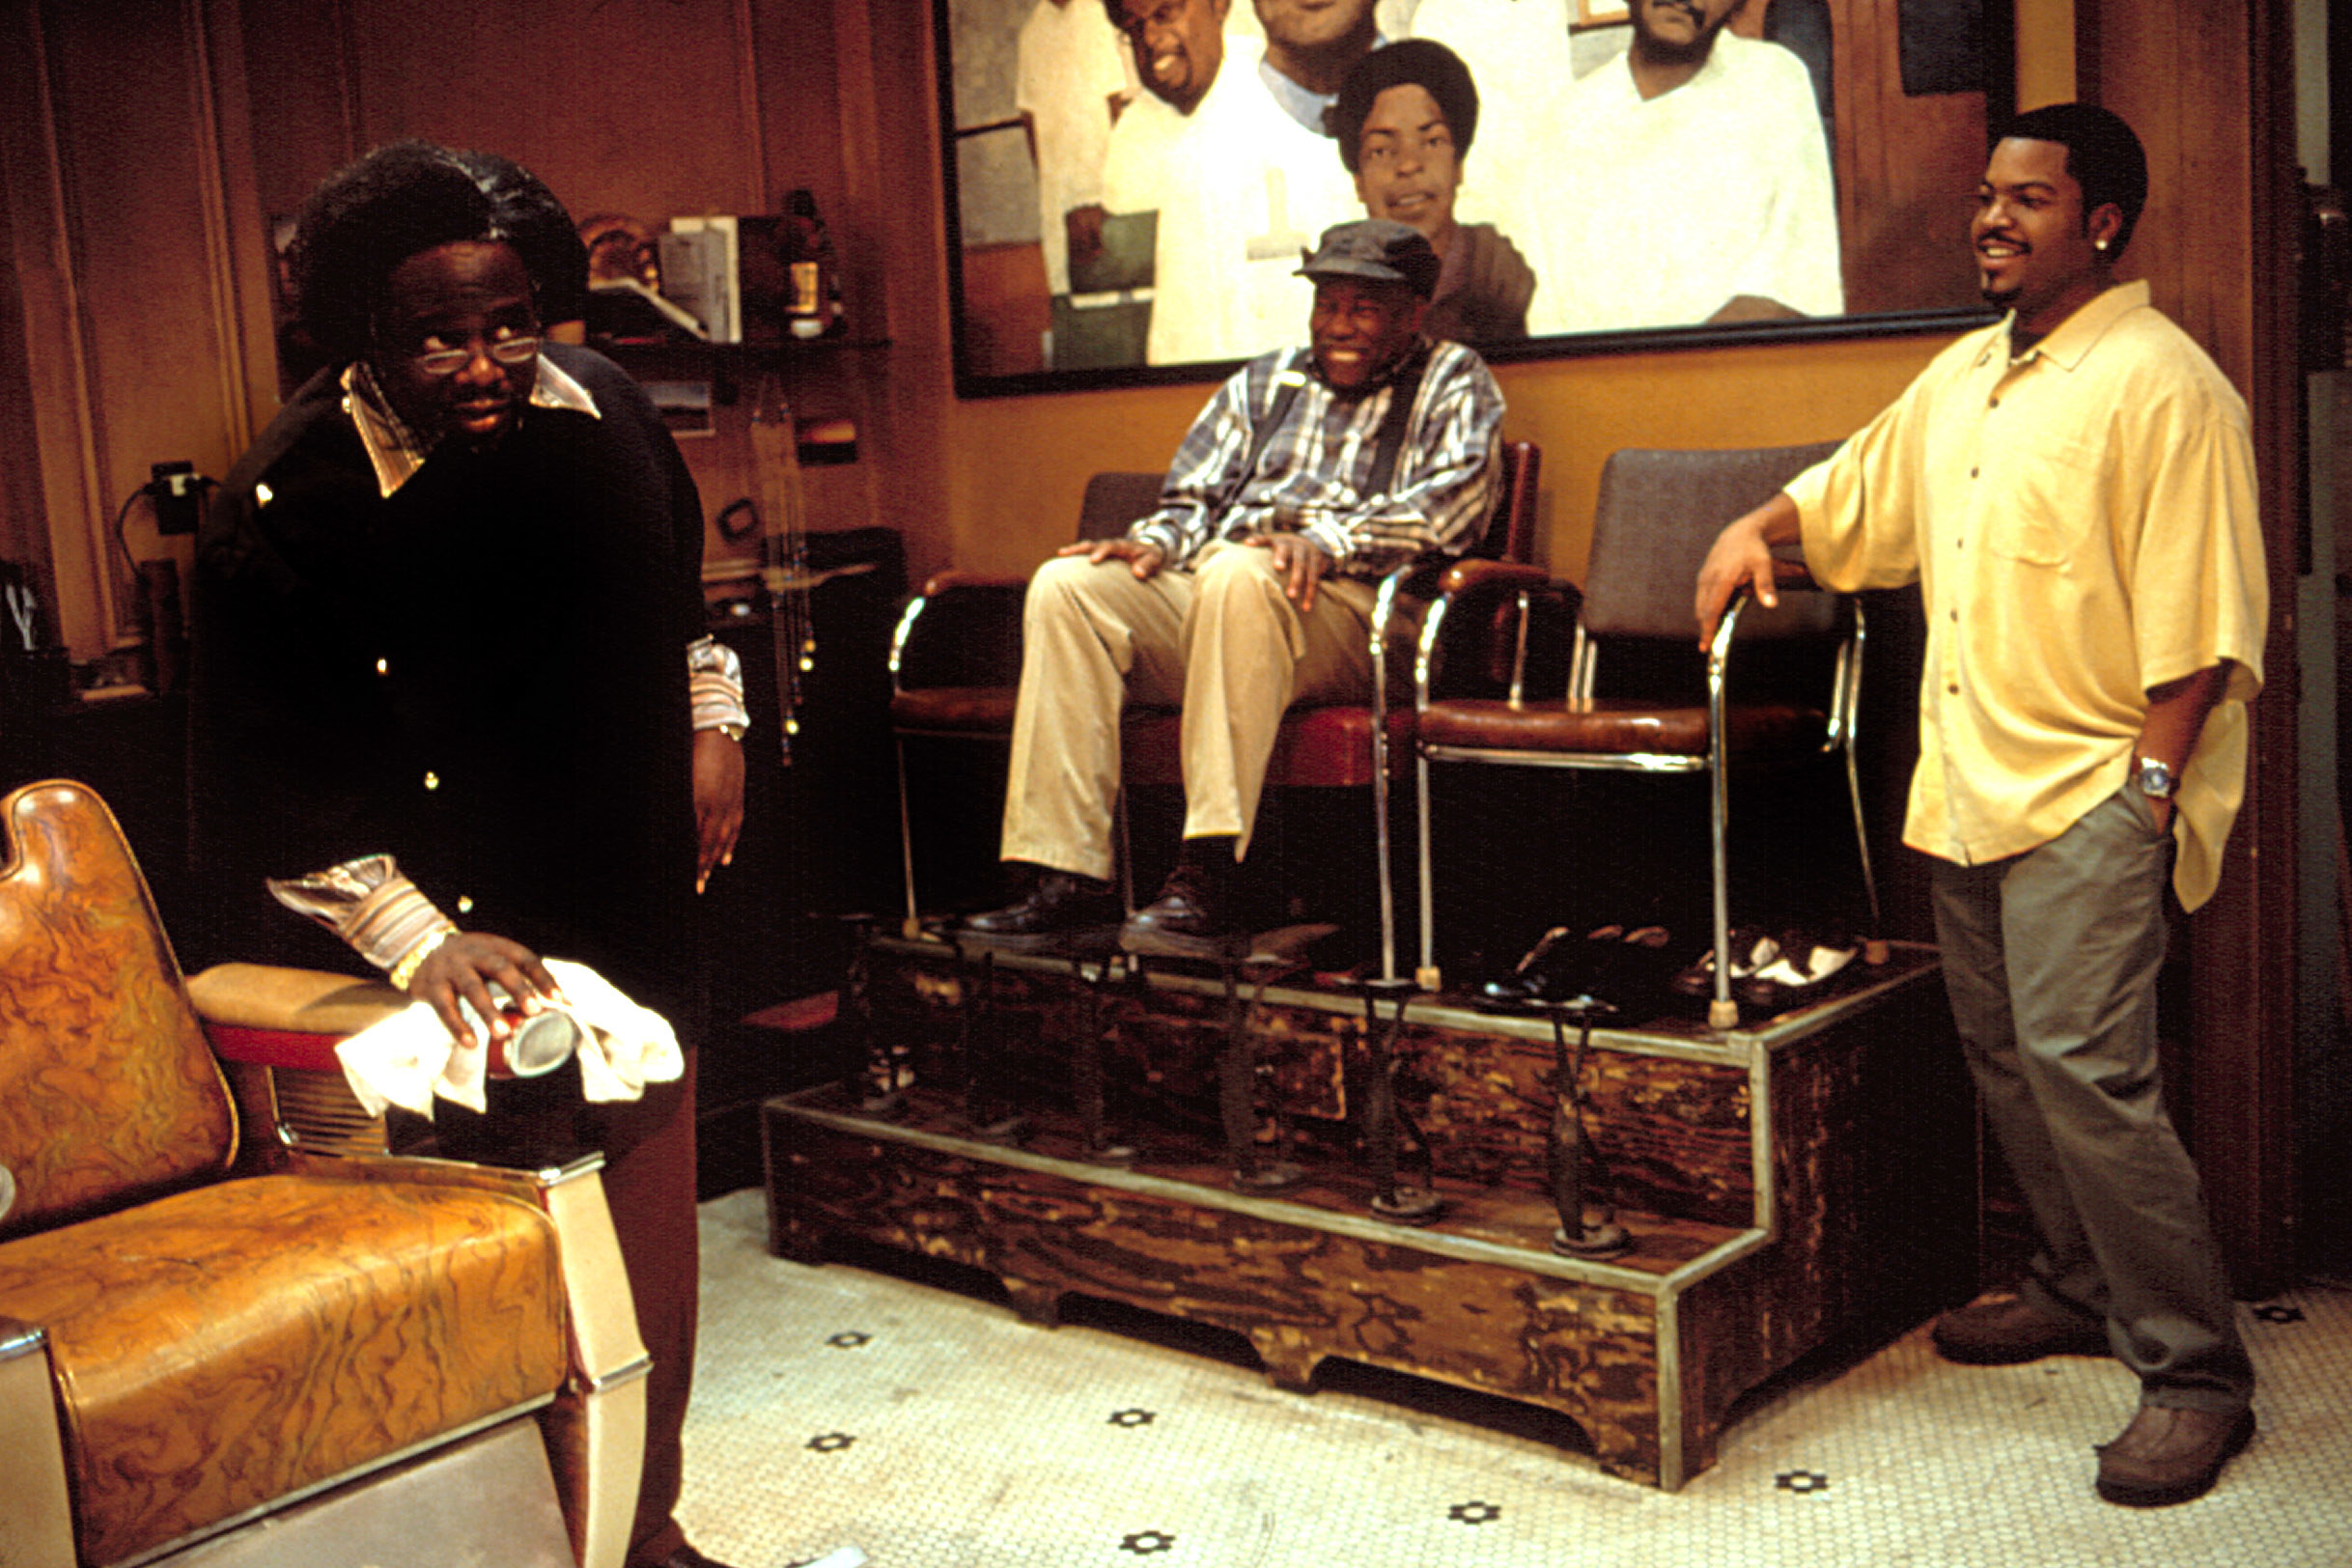 Cedric the Entertainer, Carl Wright, and Ice Cube talking in the barbershop